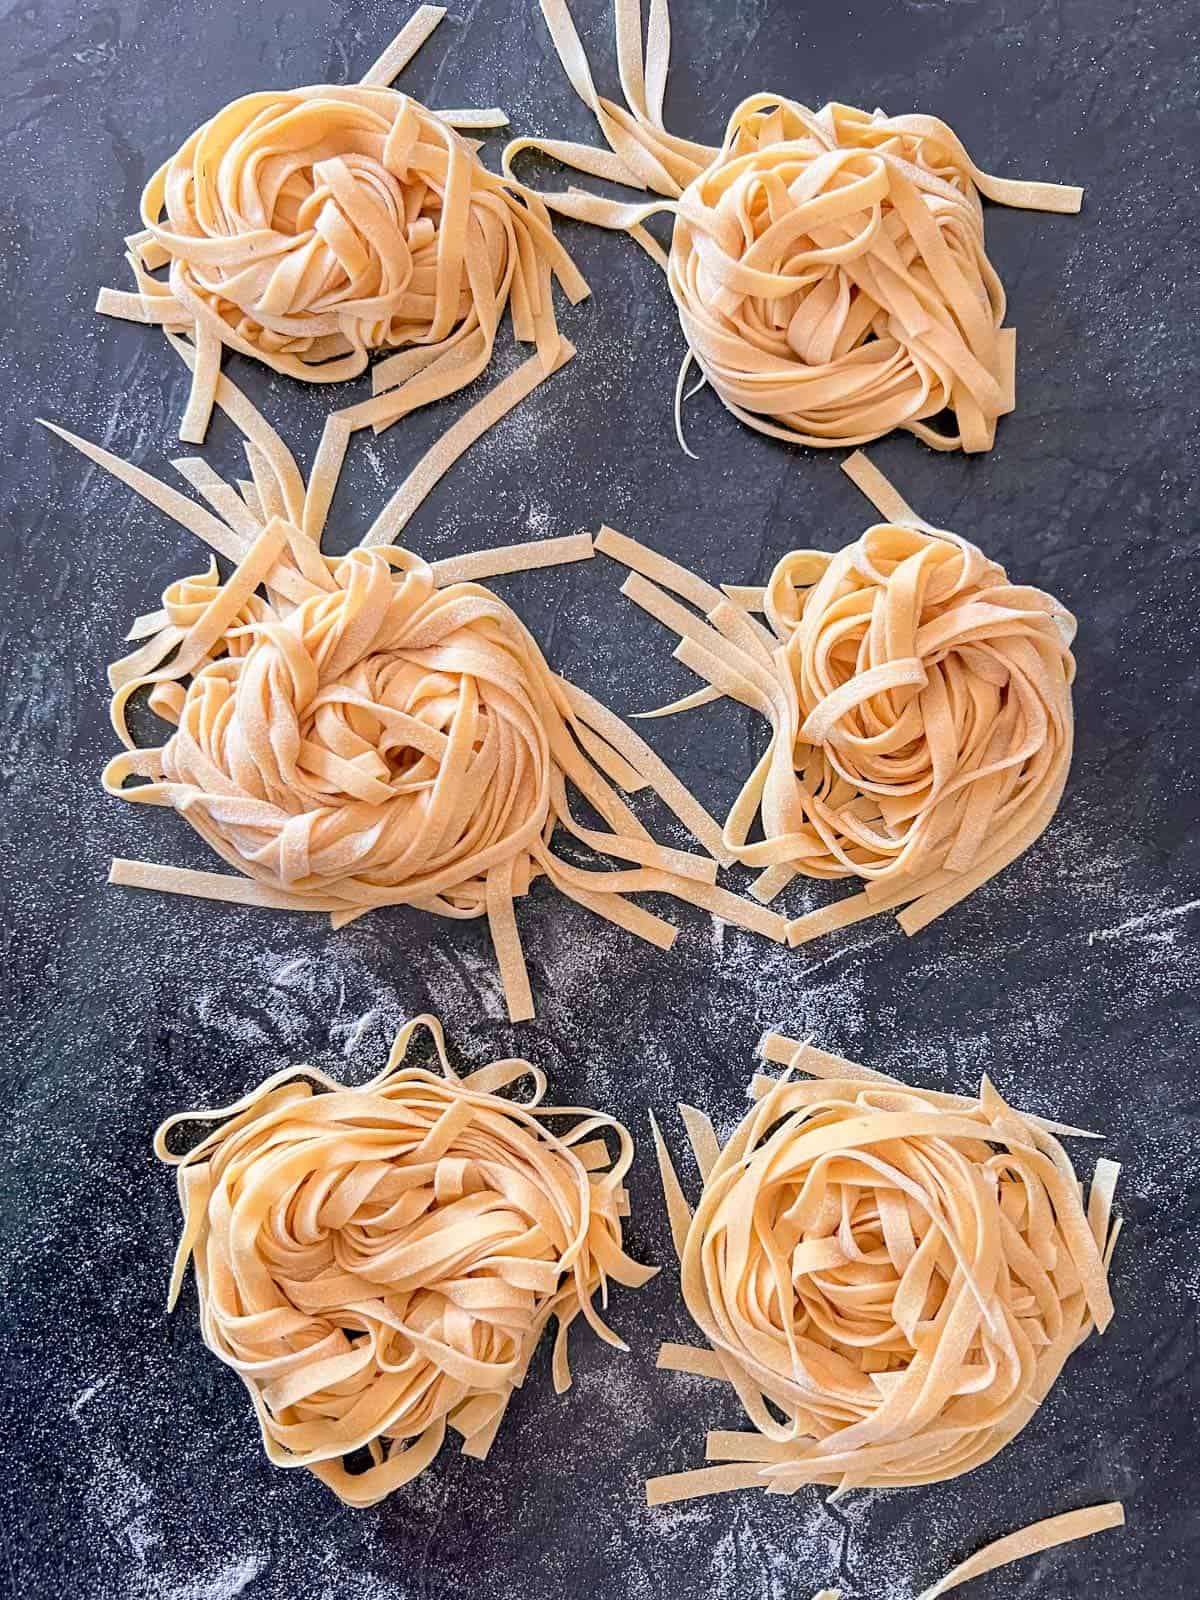 Homemade Pasta with Kitchenaid - Cuisine & Cocktails